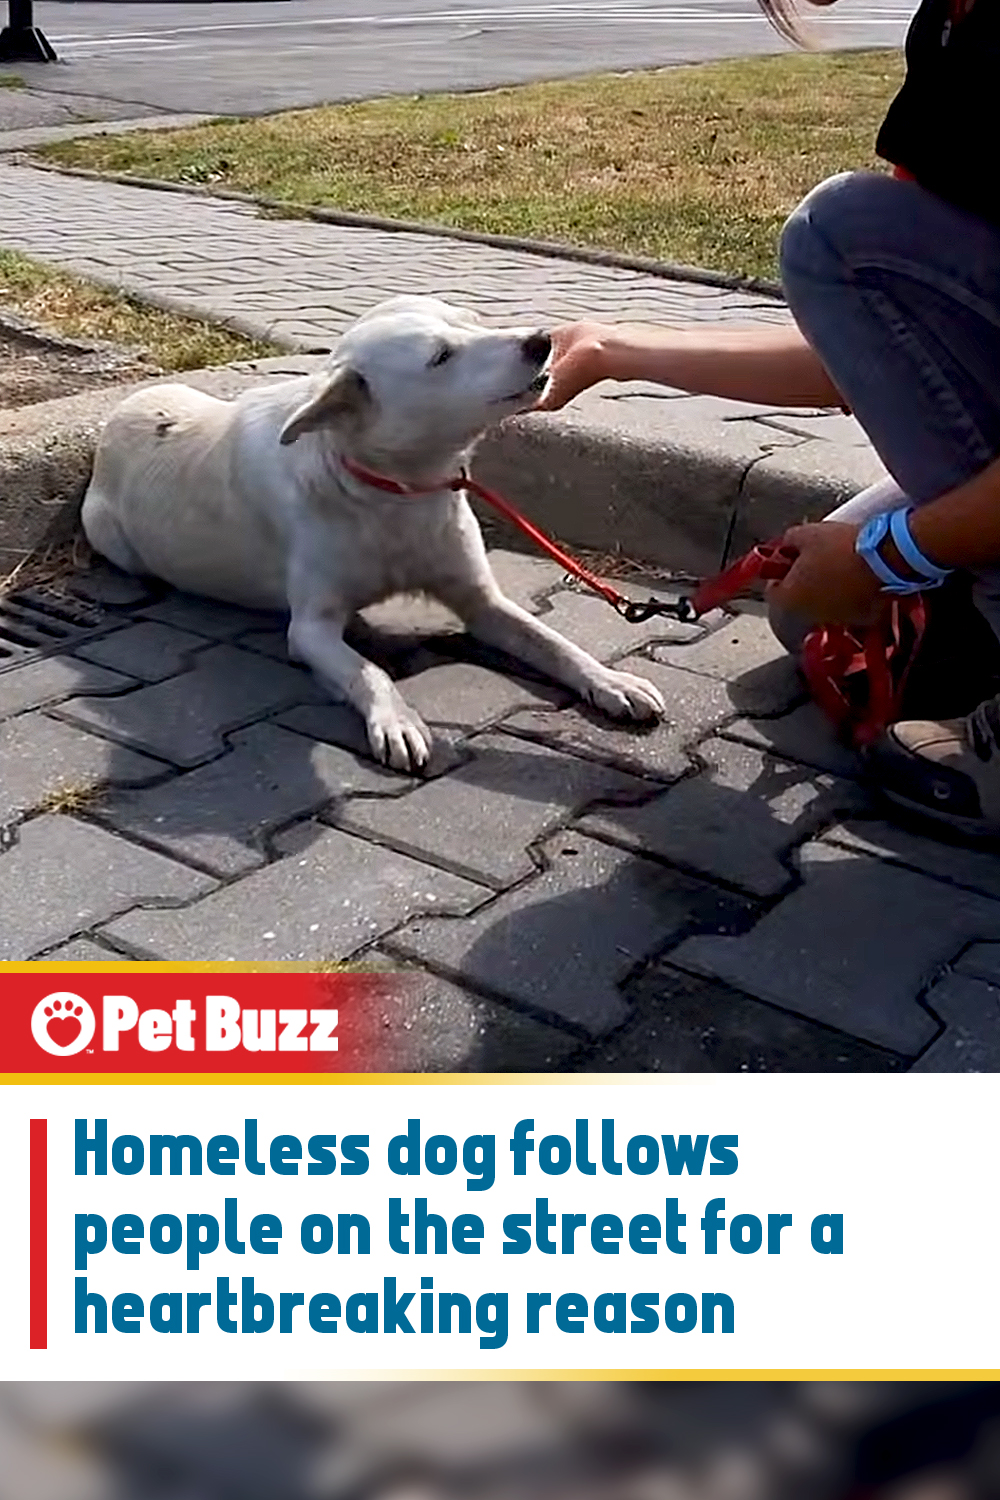 Homeless dog follows people on the street for a heartbreaking reason